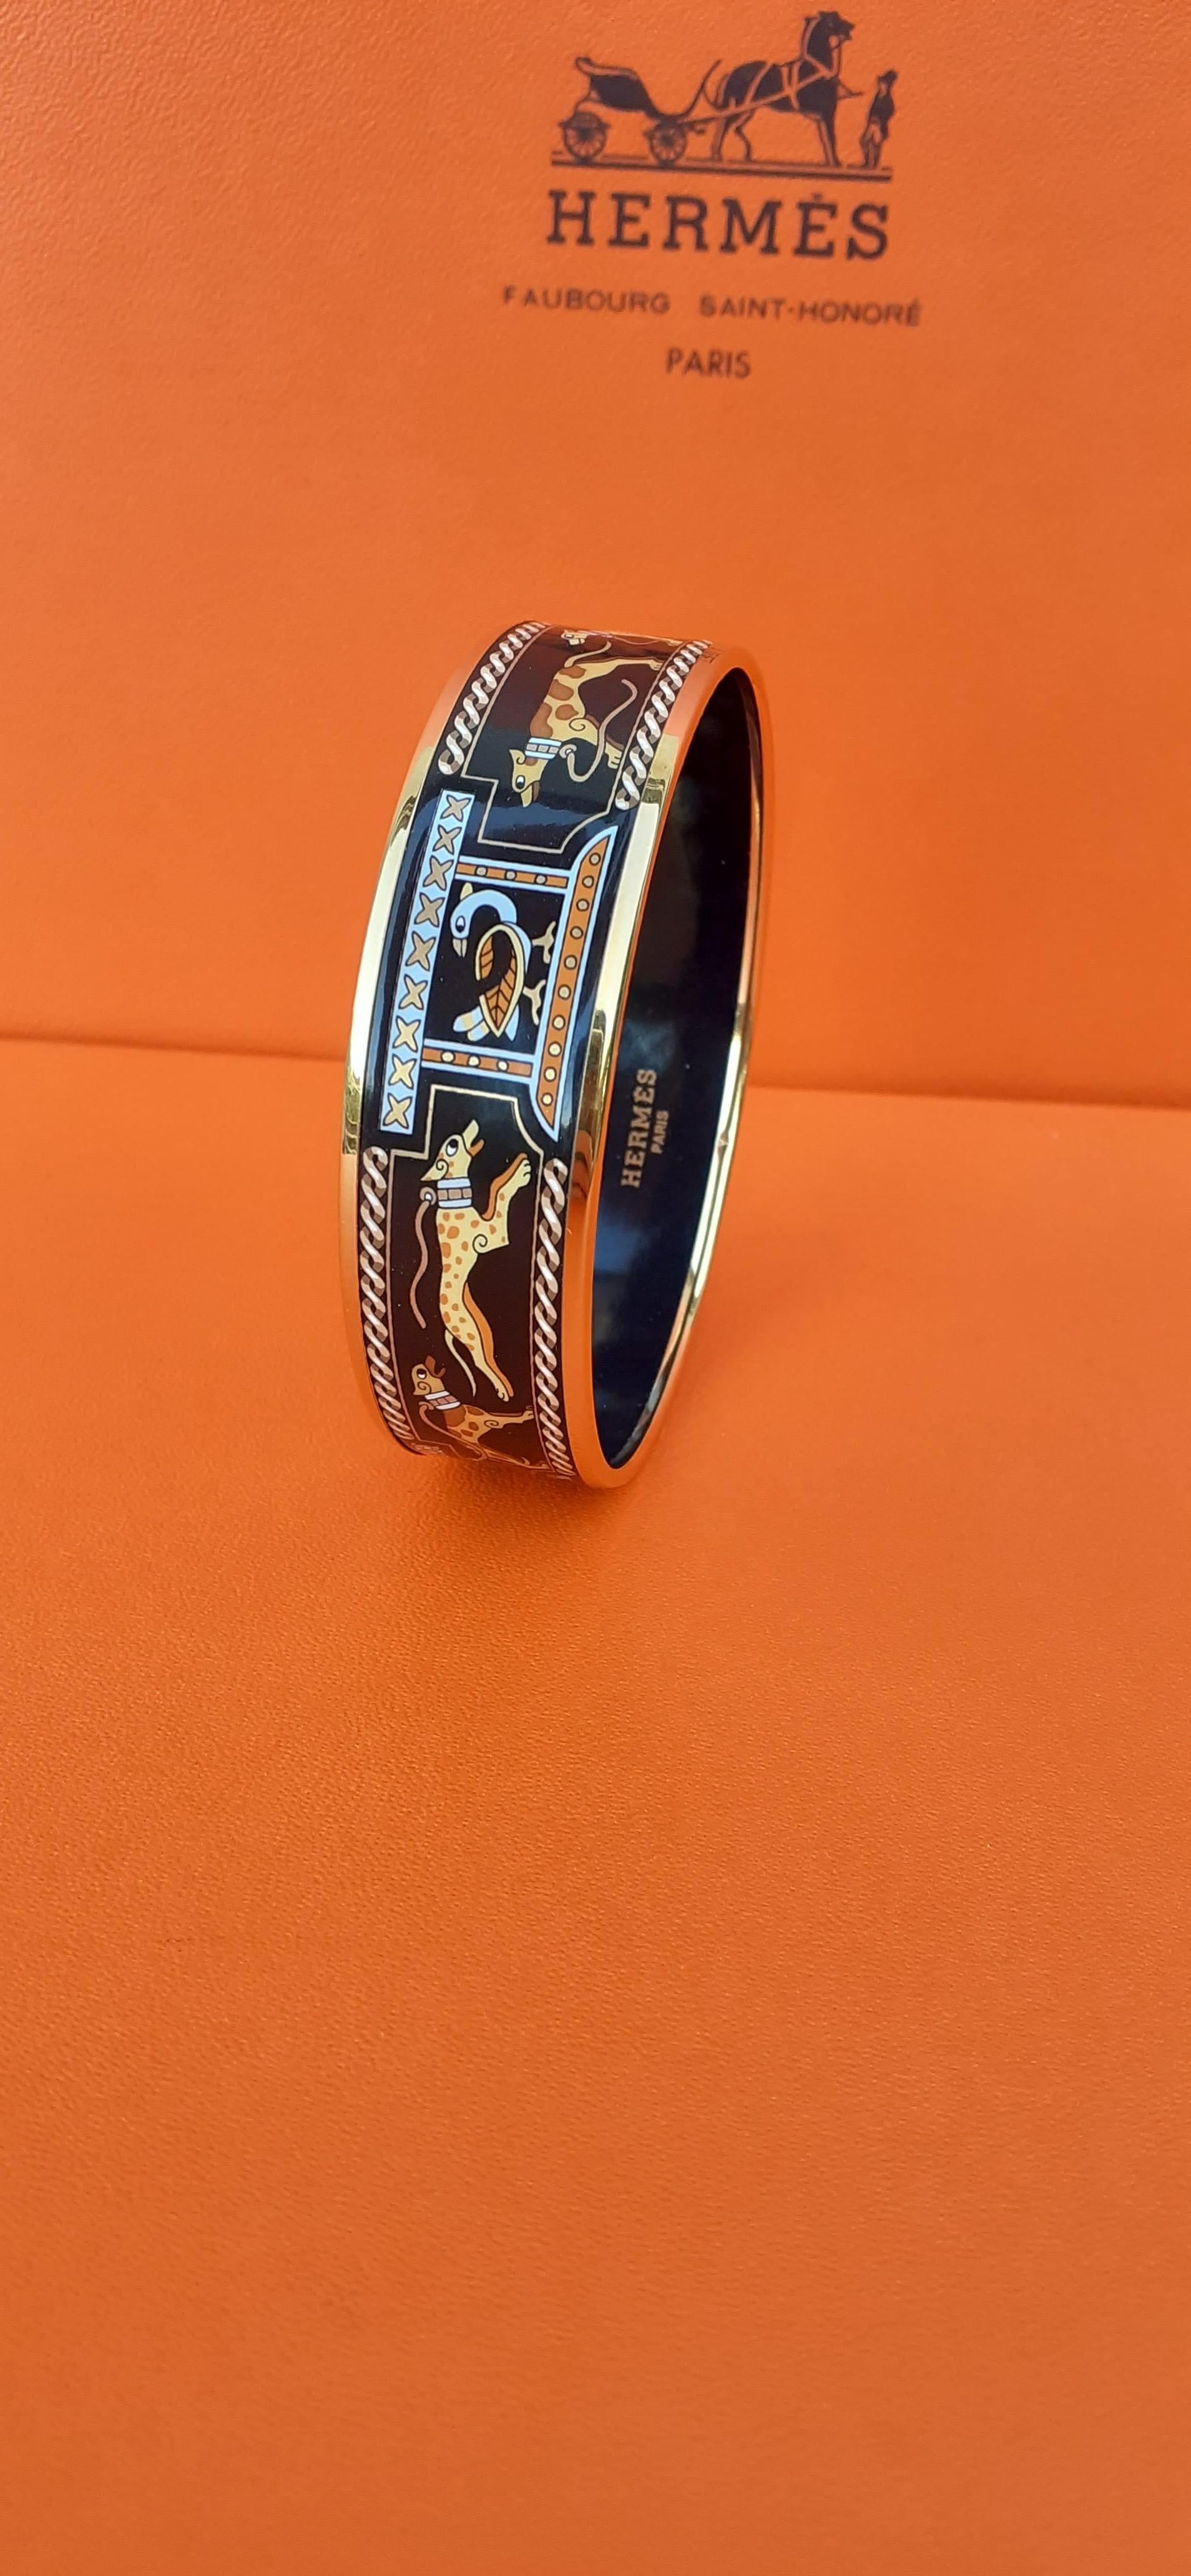 Beautiful Authentic Hermès Bracelet

Pattern: Lévriers (Greyhound dogs)

Hard to find ! 

Made in Austria + C (1999)

Made of Printed Enamel and Gold plated Hardware

Colorways: Black, Yellow, Camel, Brown

The collars, leashes and the interlacing